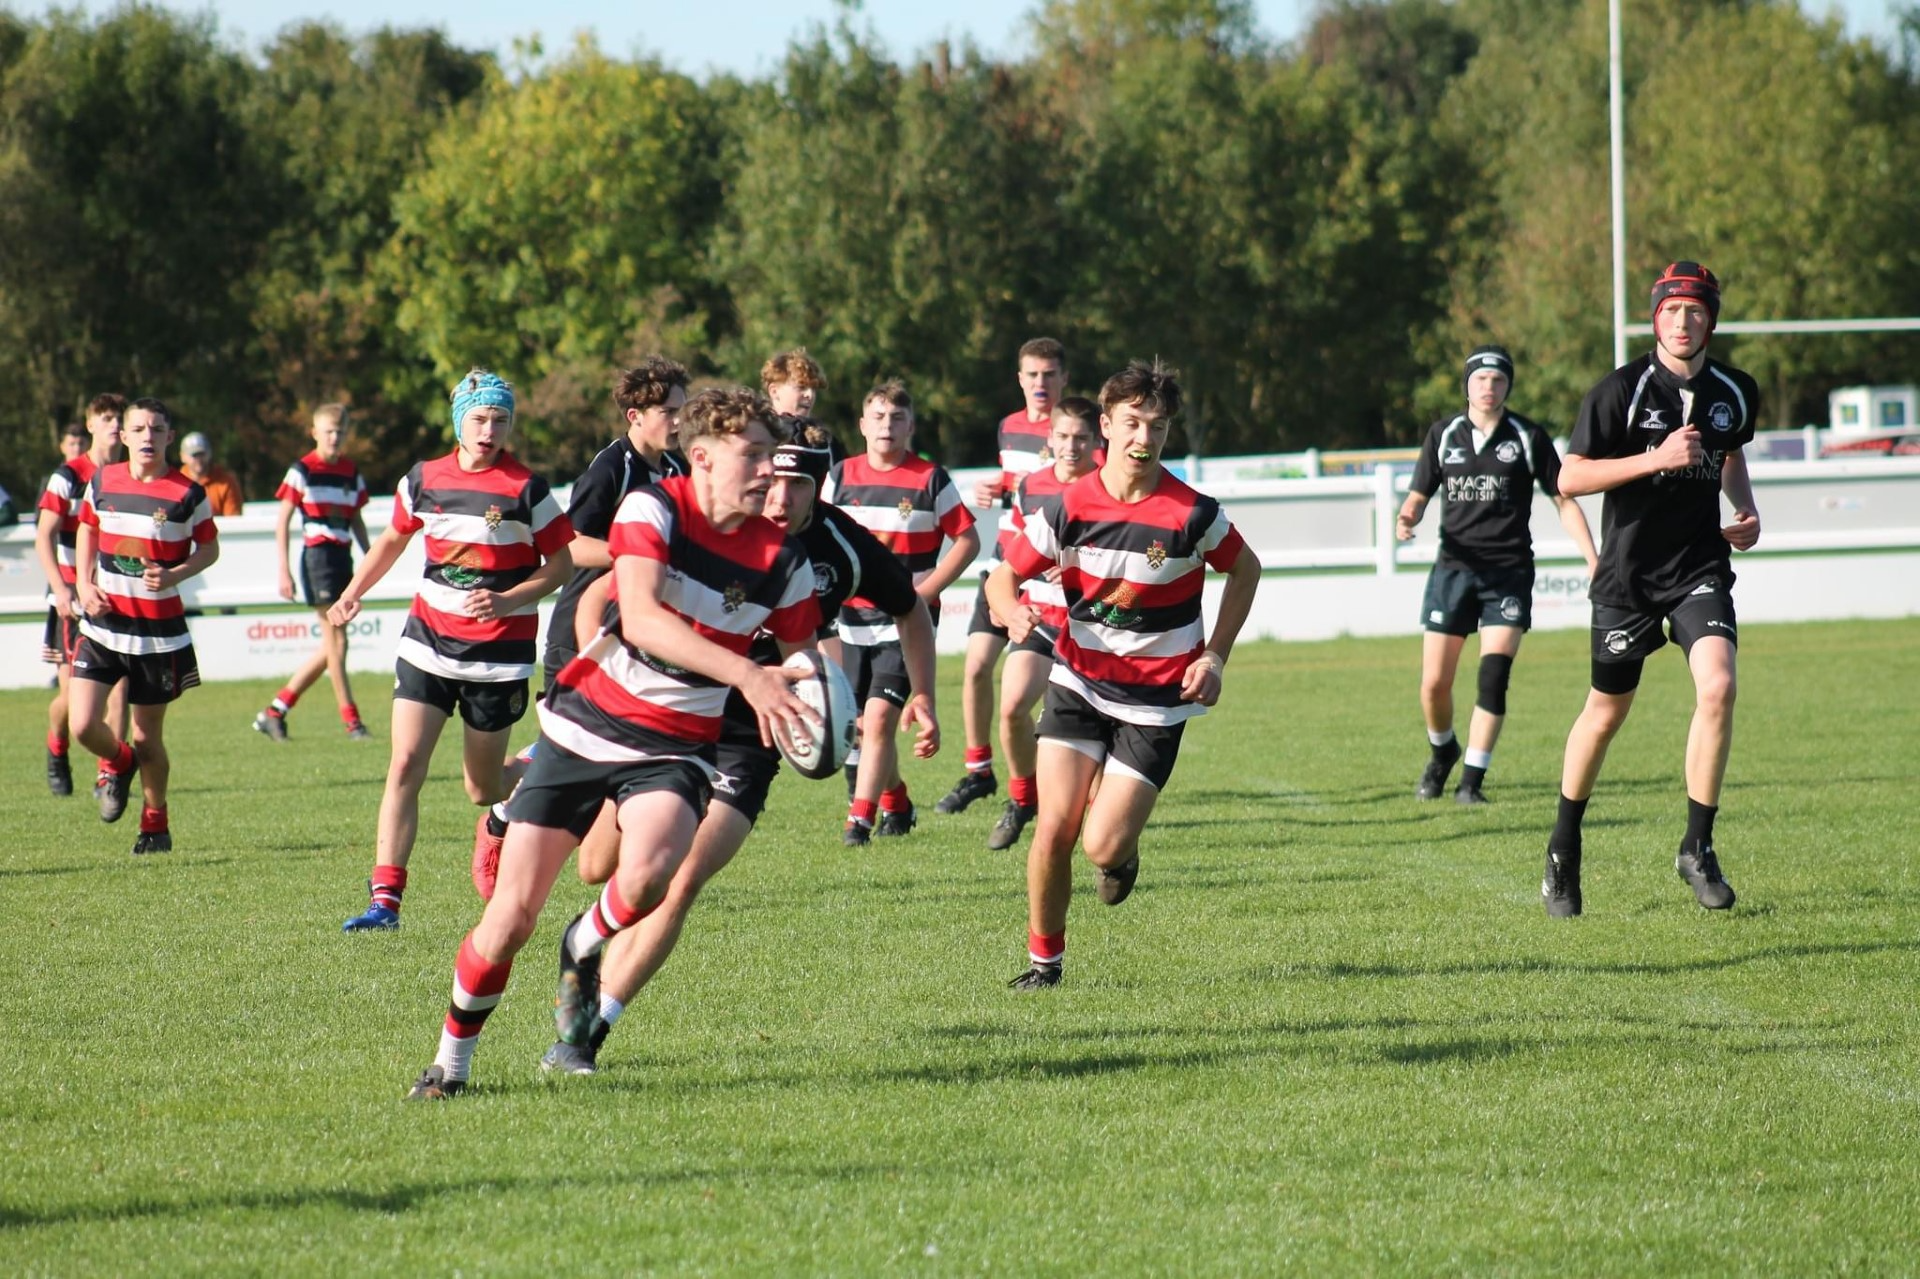 Frome Under 16s run out in a friendly against Royal Wootton Bassett